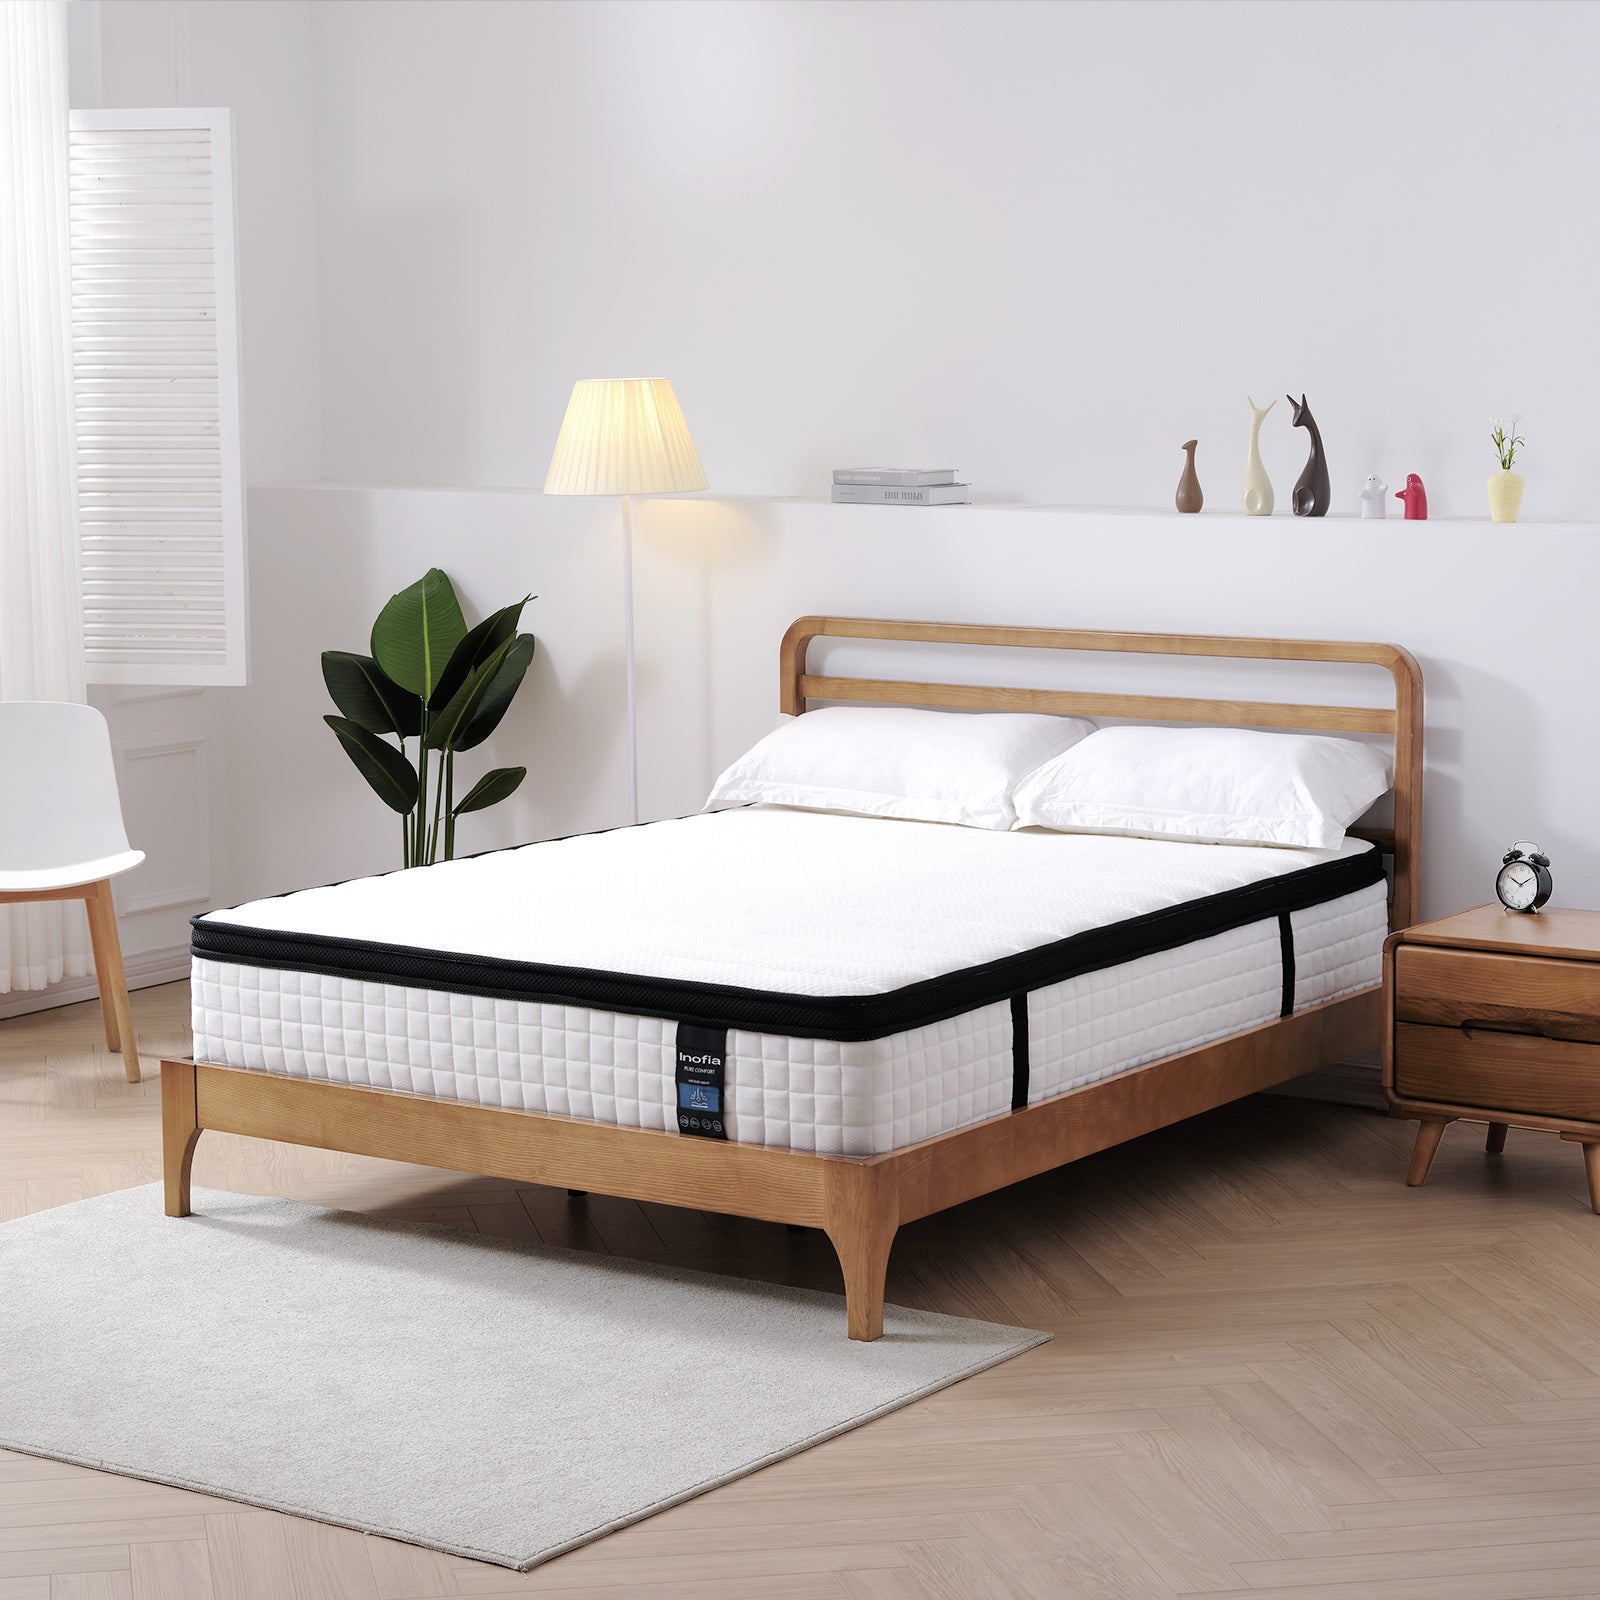 How to Care for Your Hybrid Mattress